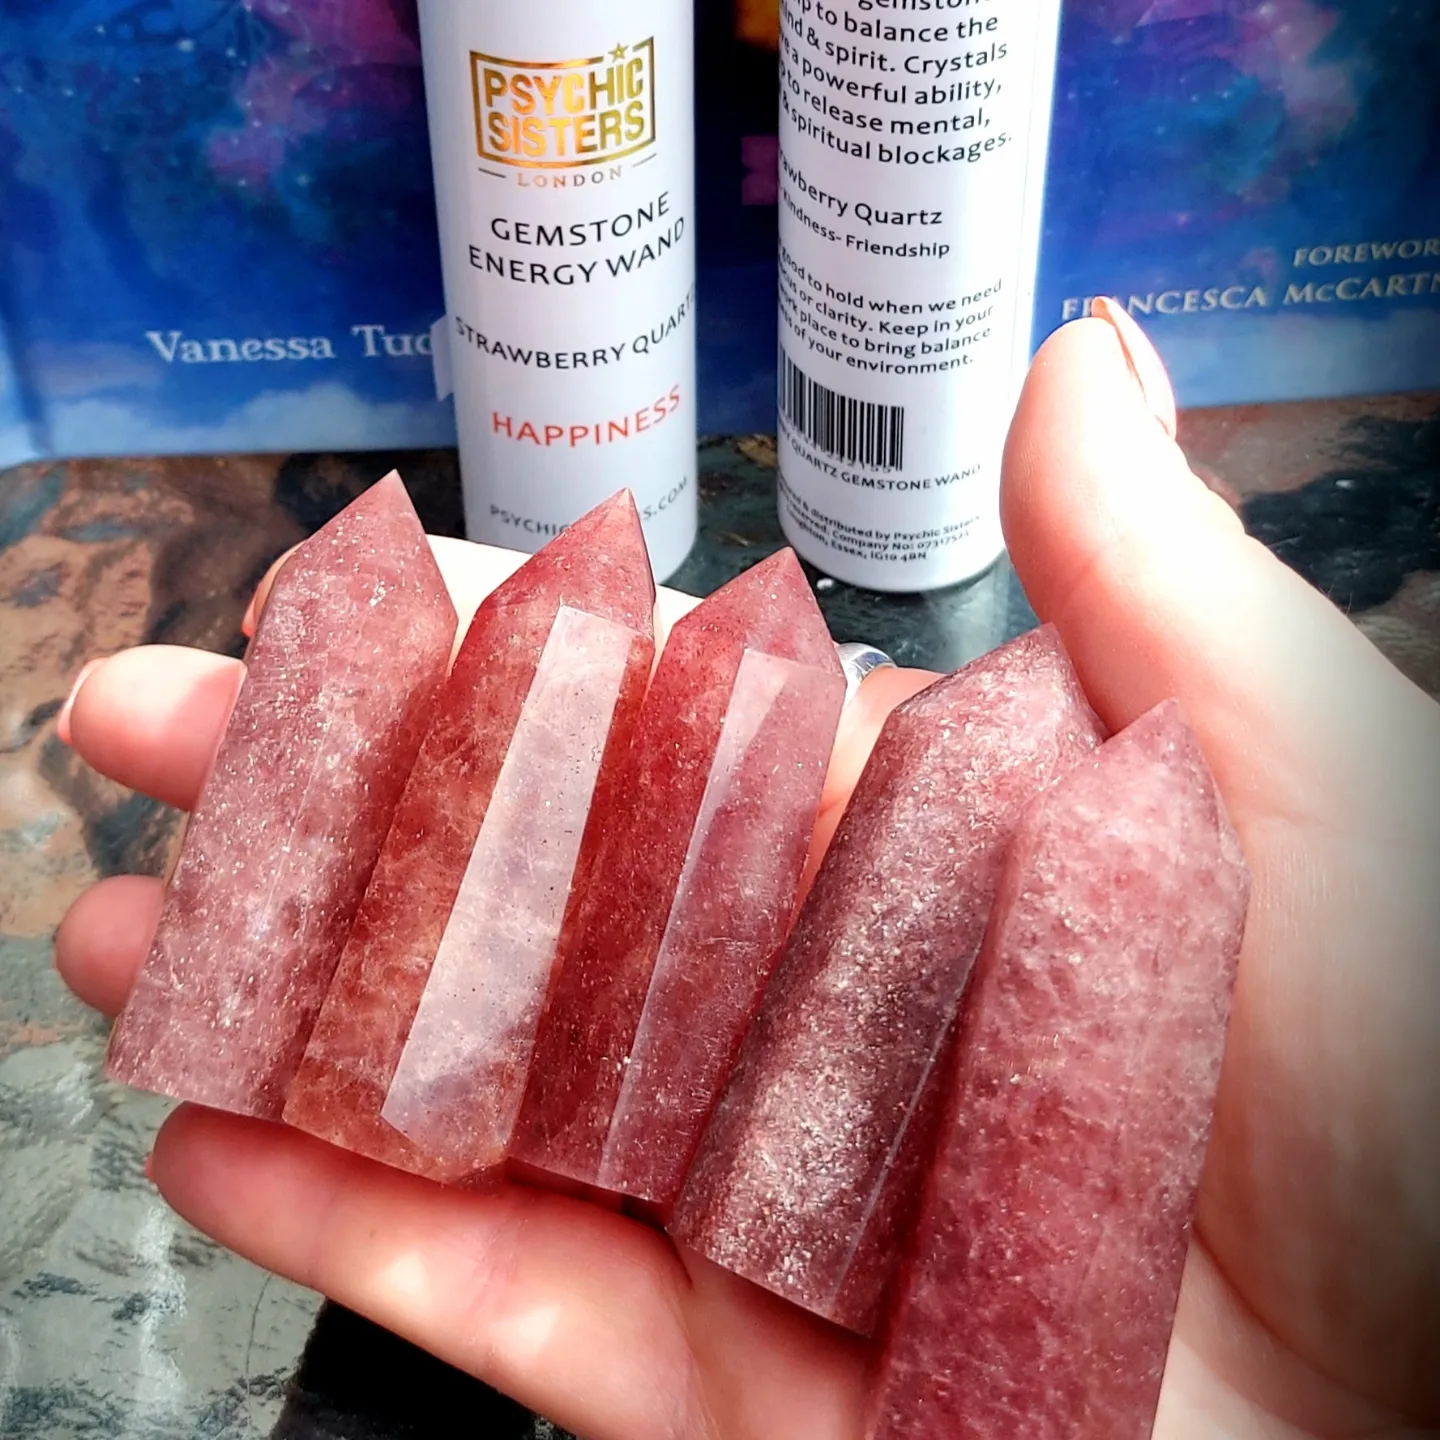 PSYCHIC SISTERS STRAWBERRY QUARTZ HAPPINESS WAND